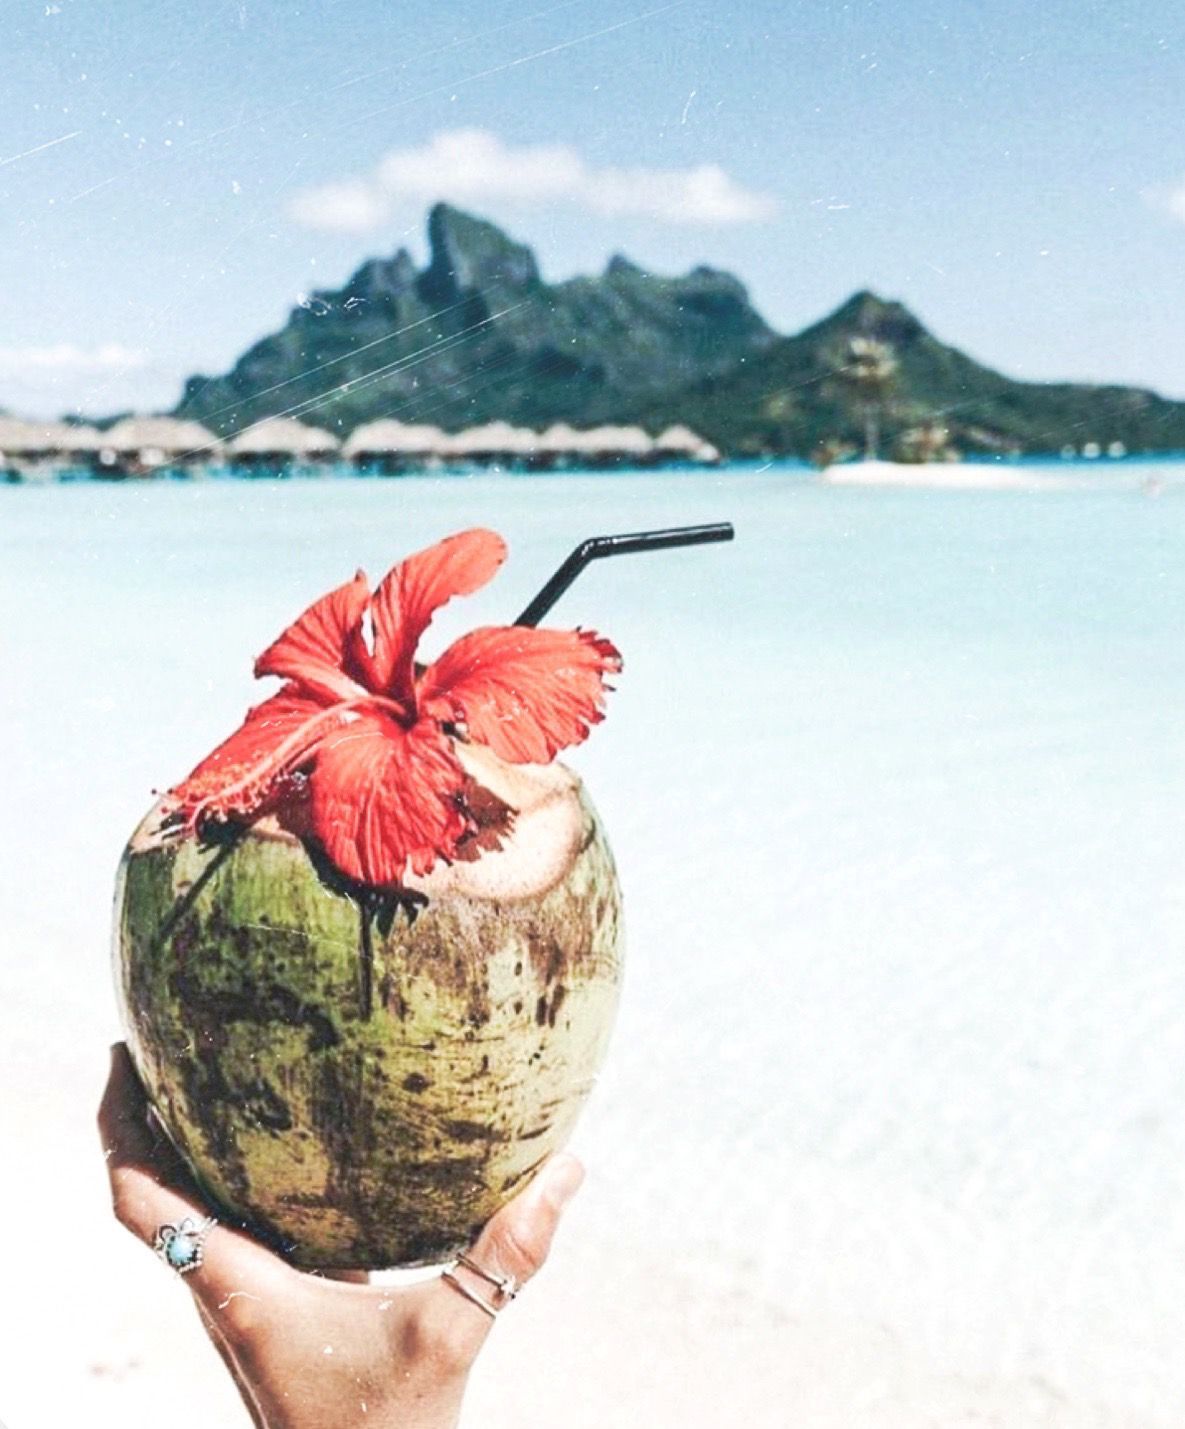 A person holding an open coconut with flowers - Coconut